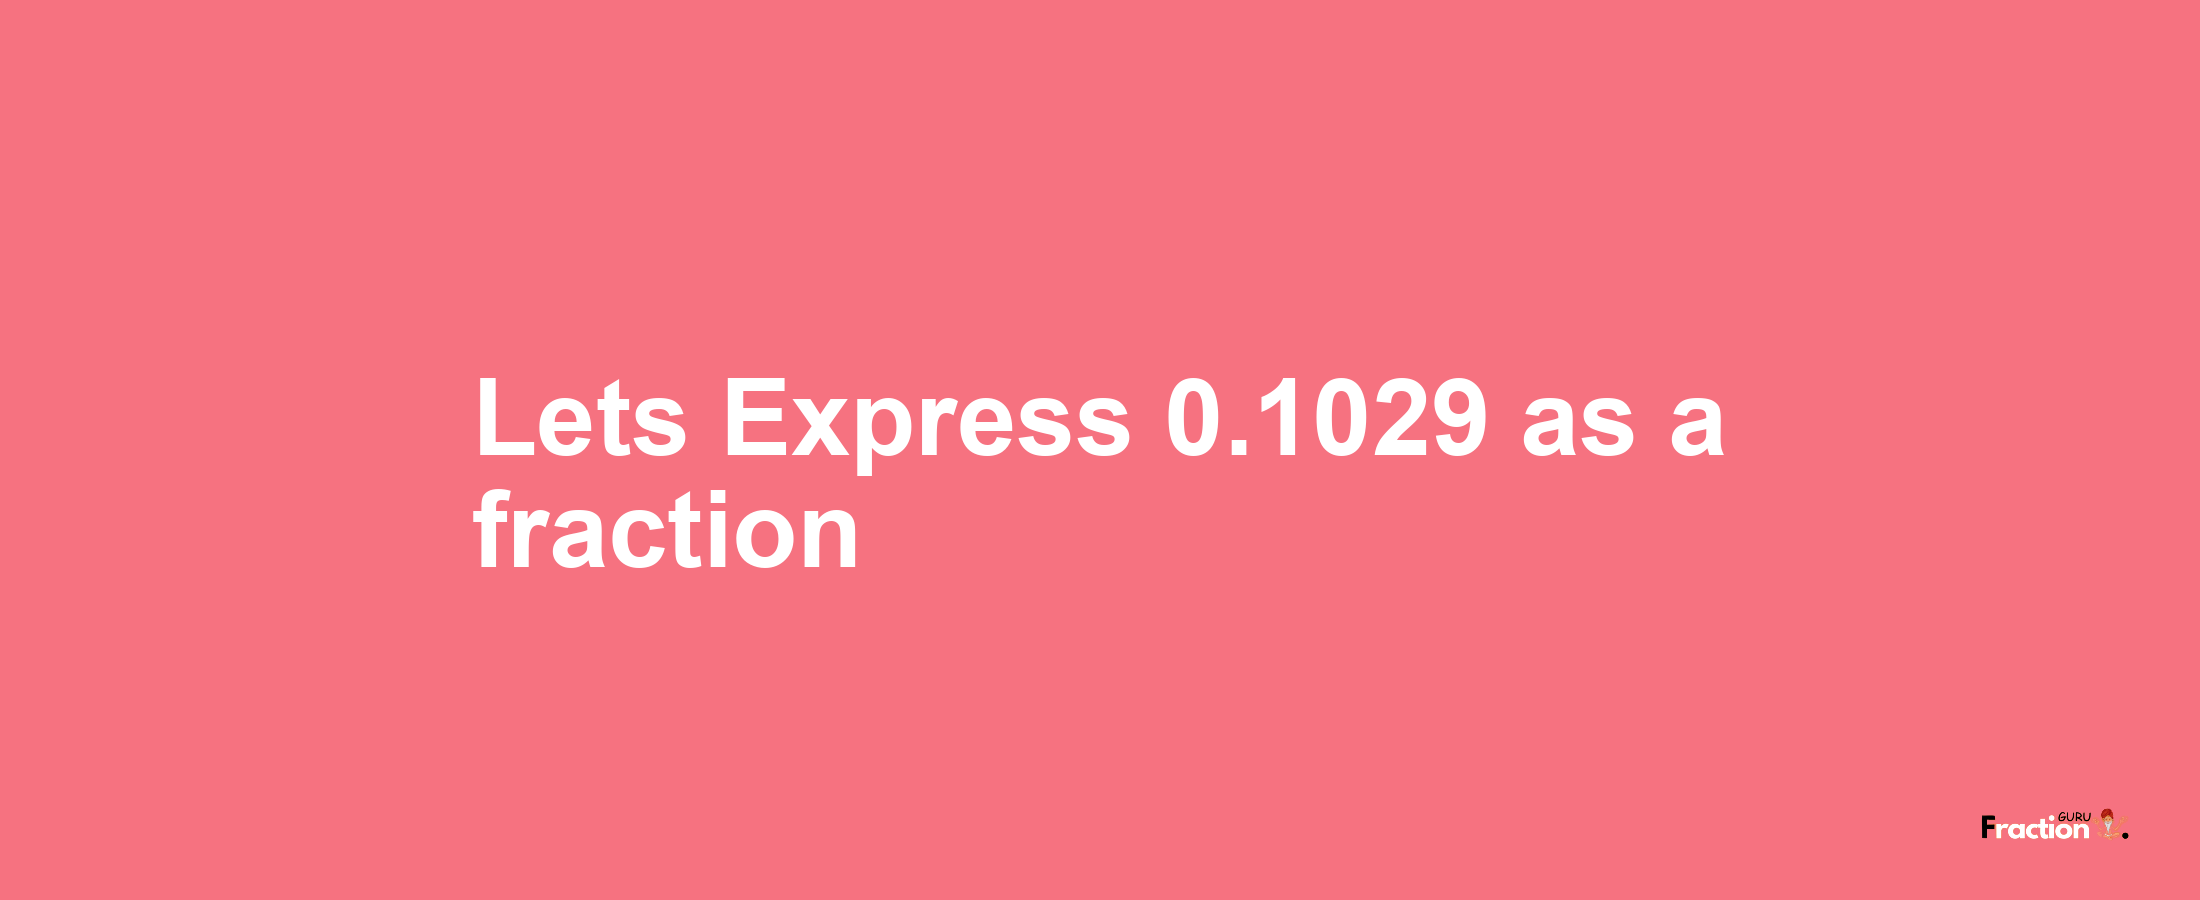 Lets Express 0.1029 as afraction